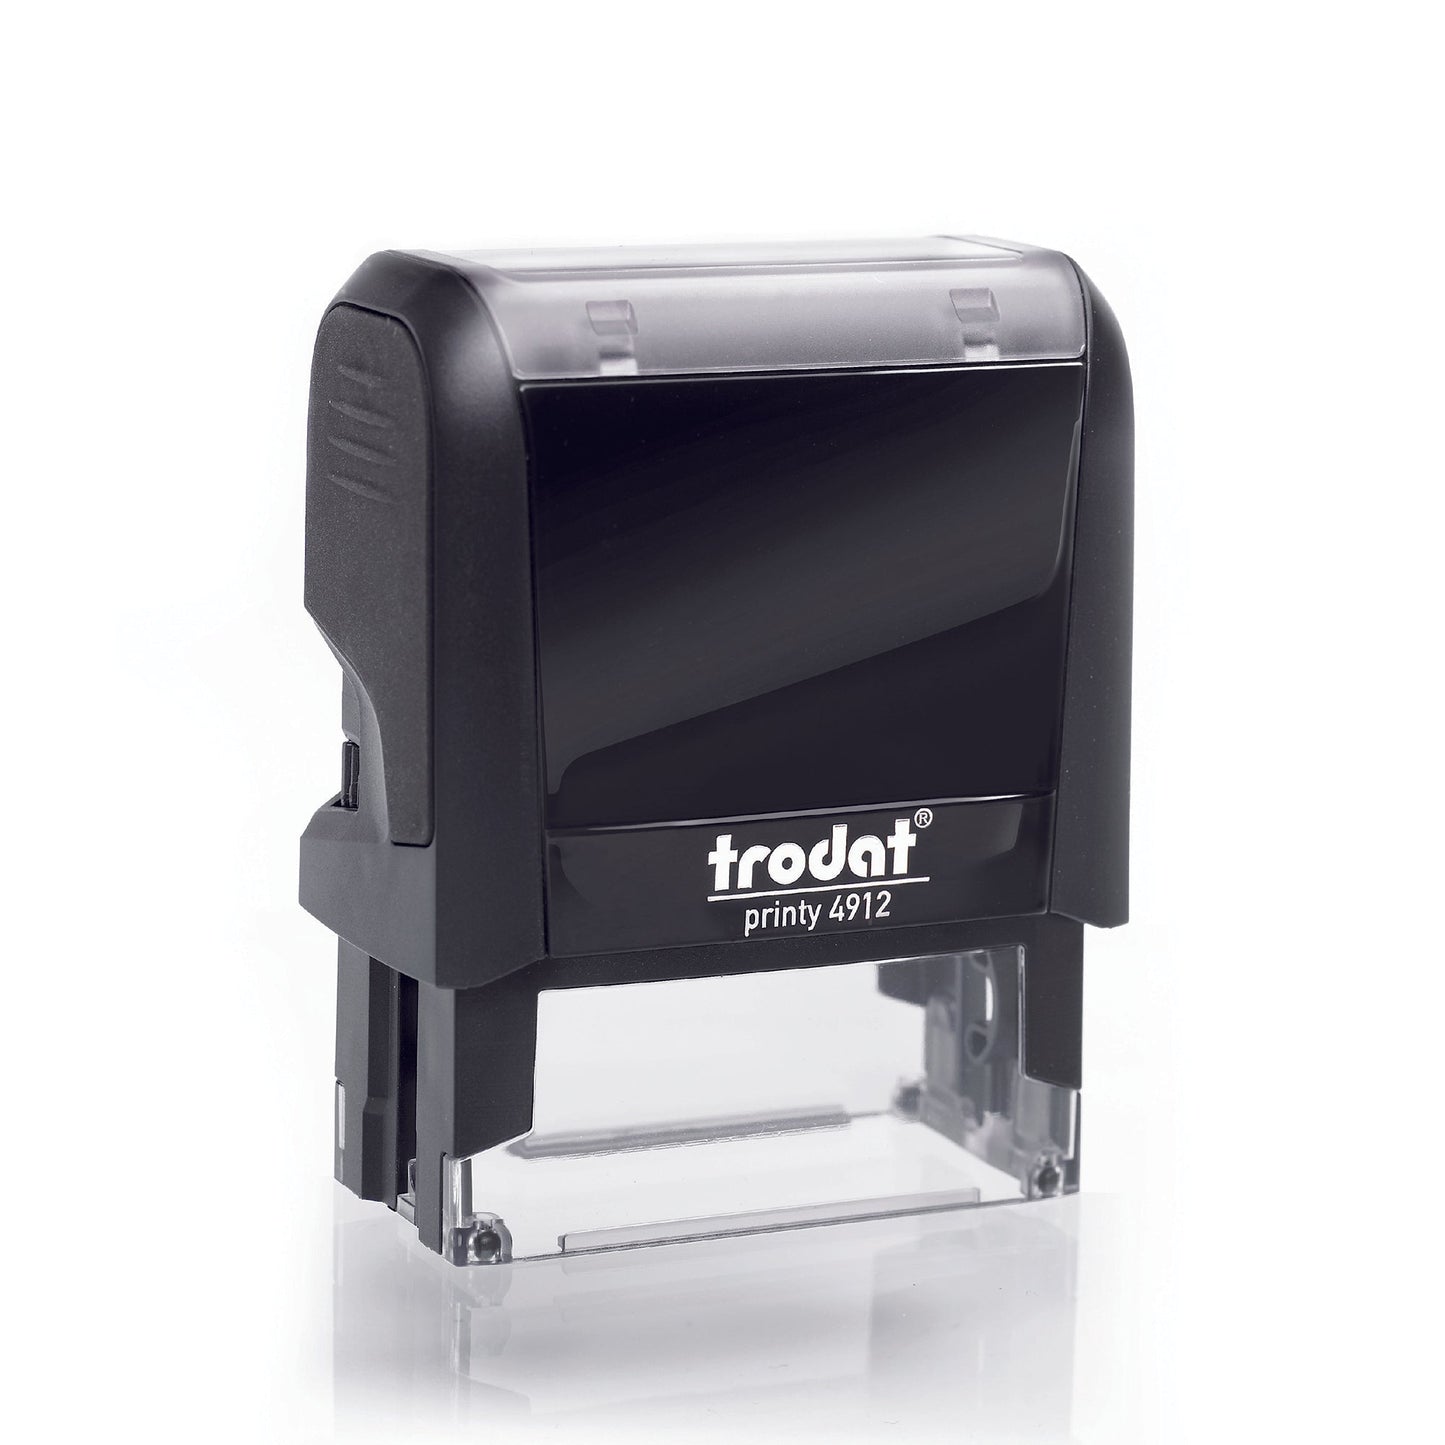 Copy With Border - Rubber Stamp - Trodat 4912 - 47mm x 18mm Impression